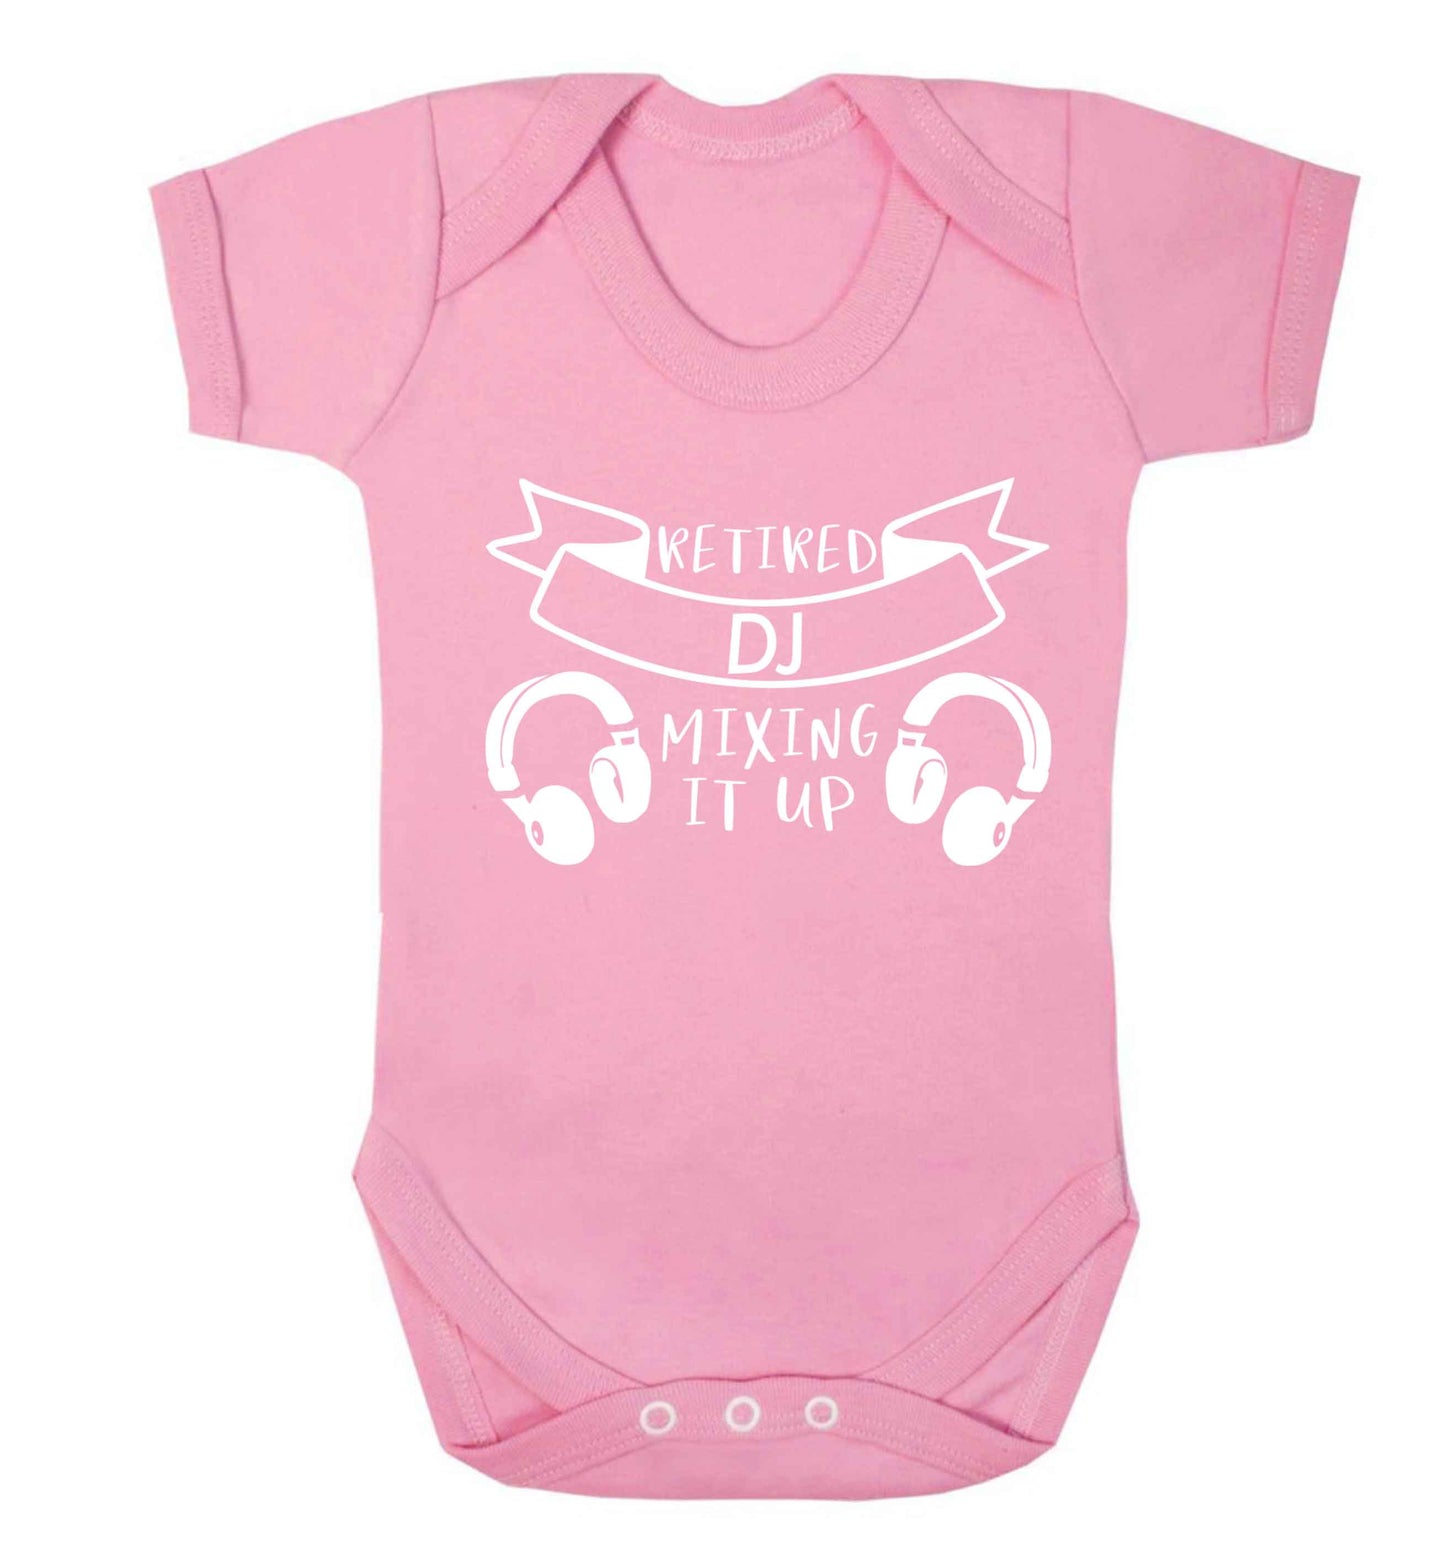 Retired DJ mixing it up Baby Vest pale pink 18-24 months